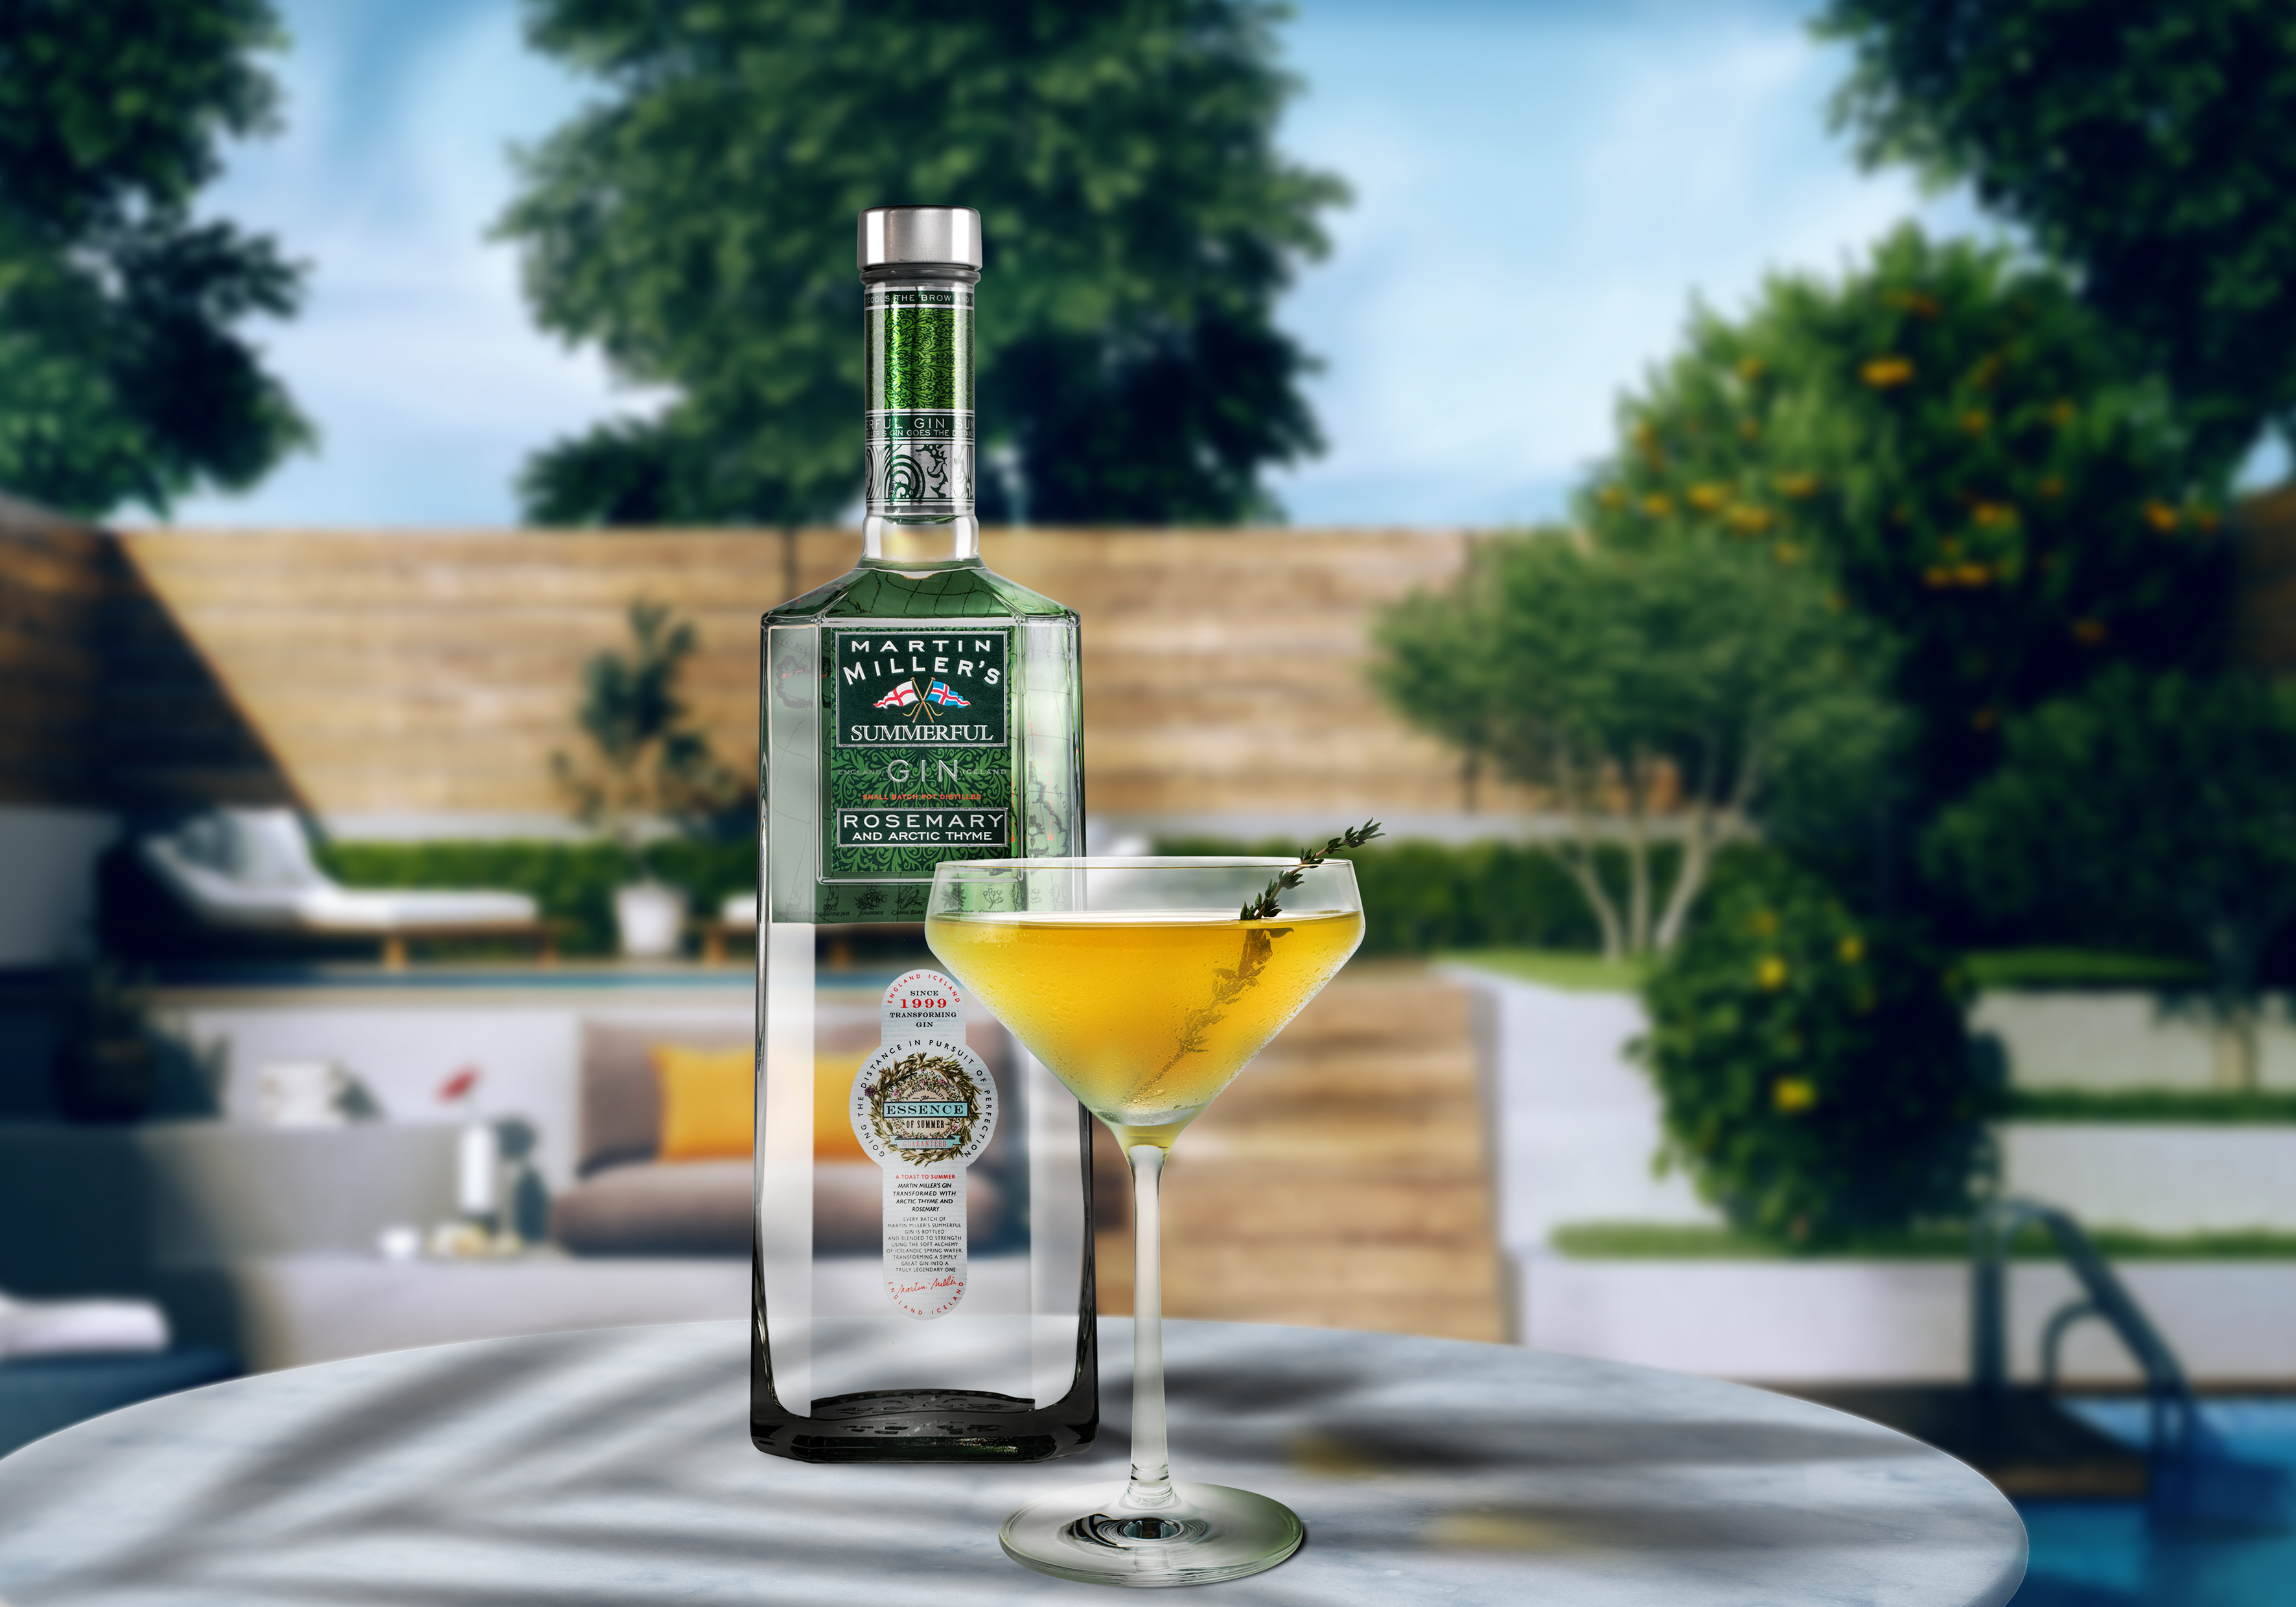 Martin Miller's Summerful Gin Bee's Knees cocktail